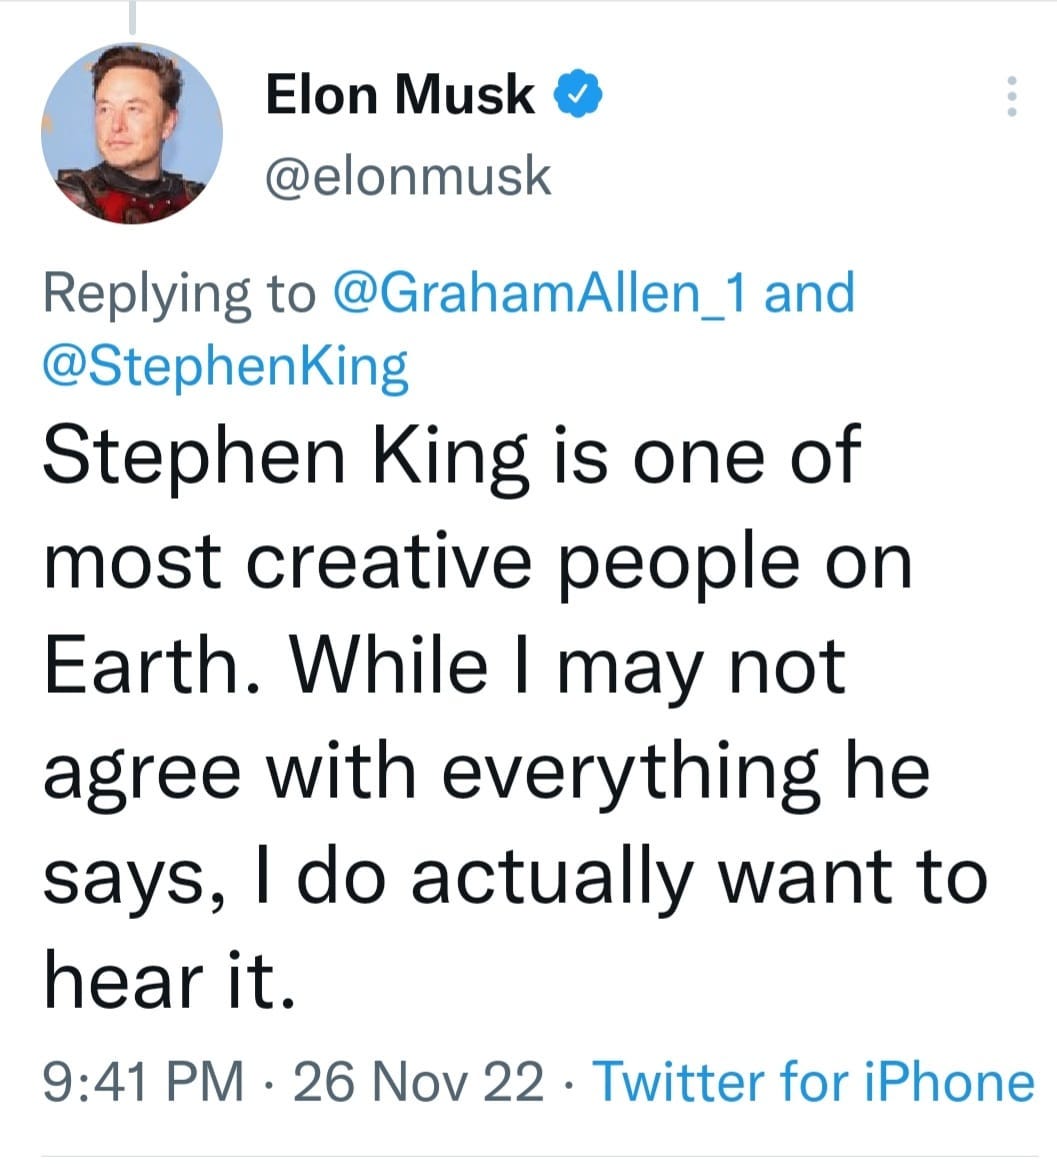 May be a Twitter screenshot of 1 person and text that says 'Elon Musk @elonmusk Replying to @GrahamAllen_1 and @StephenKing Stephen King is one of most creative people on Earth. While I may not agree with everything he says, I do actually want to hear it. 9:41 PM. PM 26 Nov 22 Twitter for iPhone'